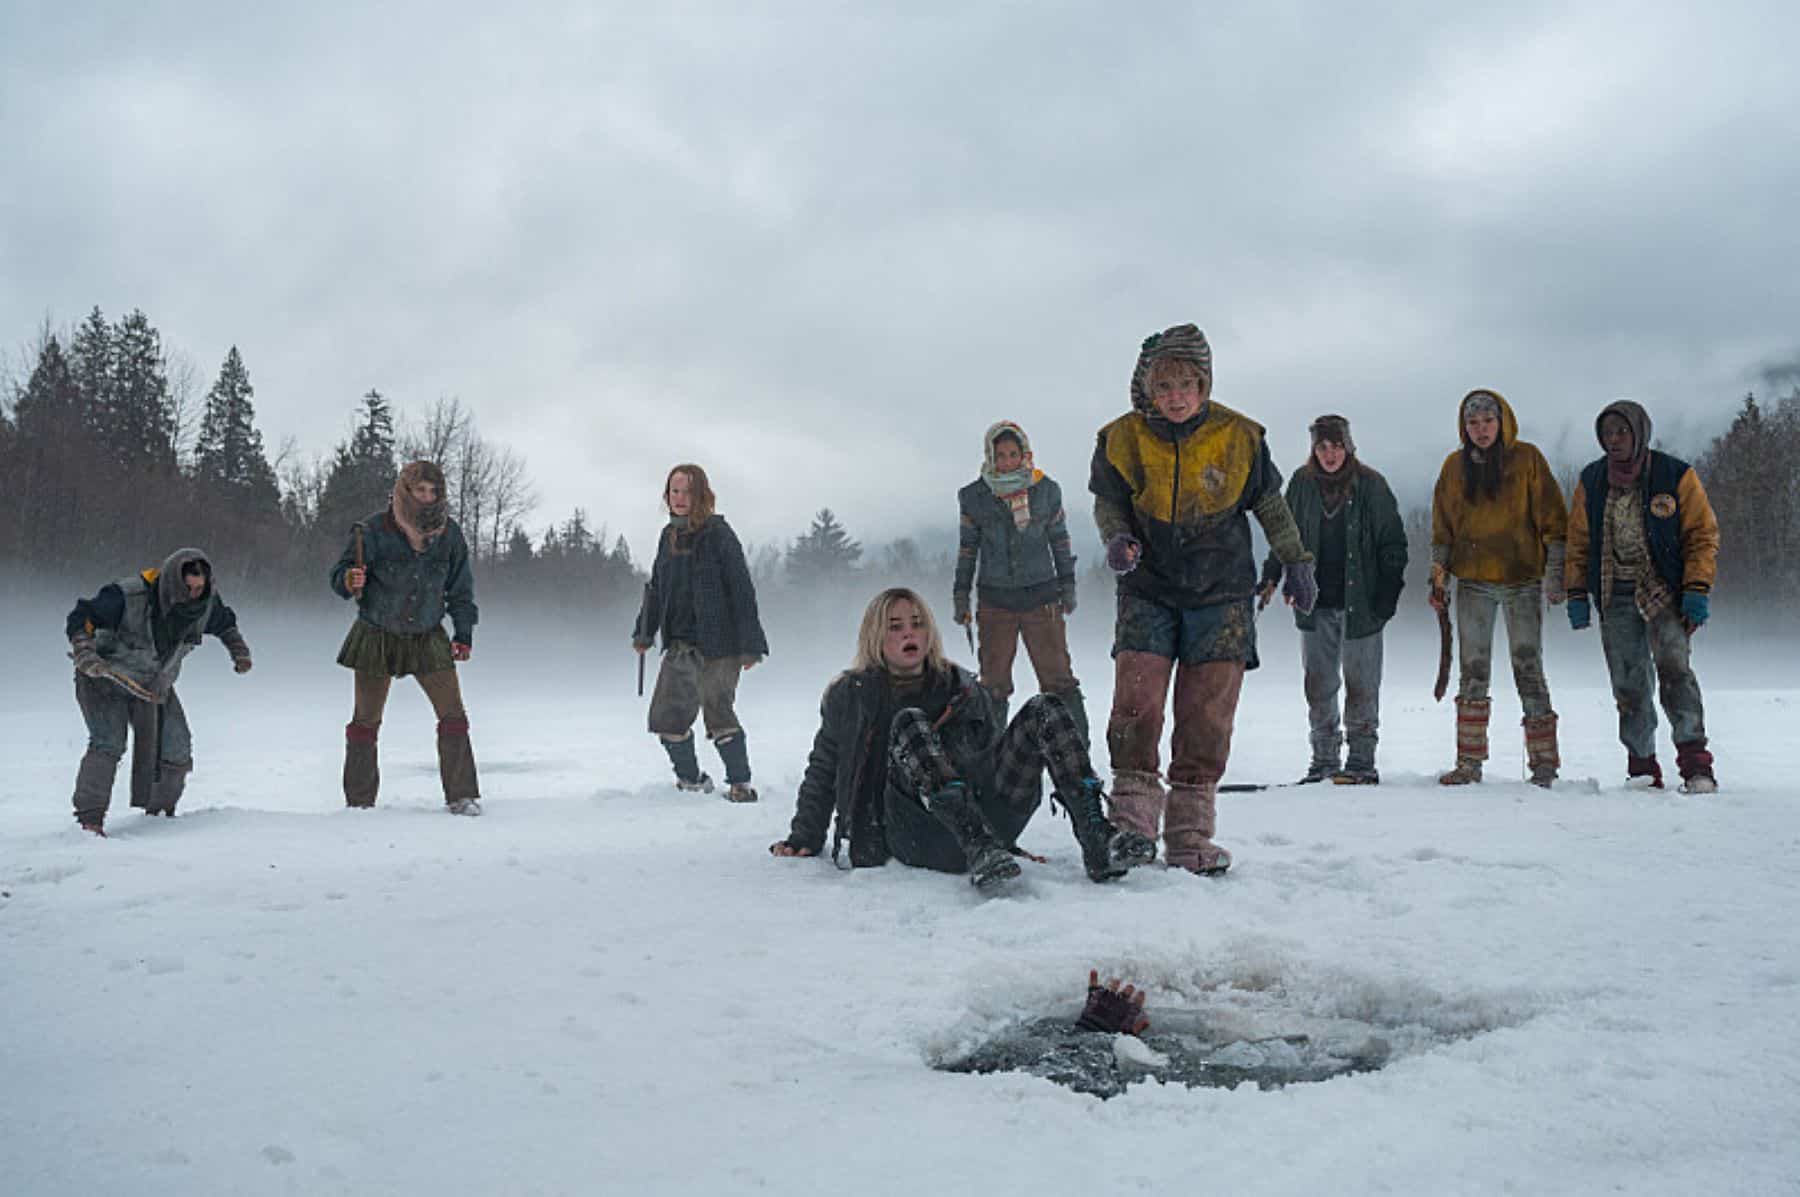 A group of girls surround someone drowning in a frozen lake in this photo by Showtime.